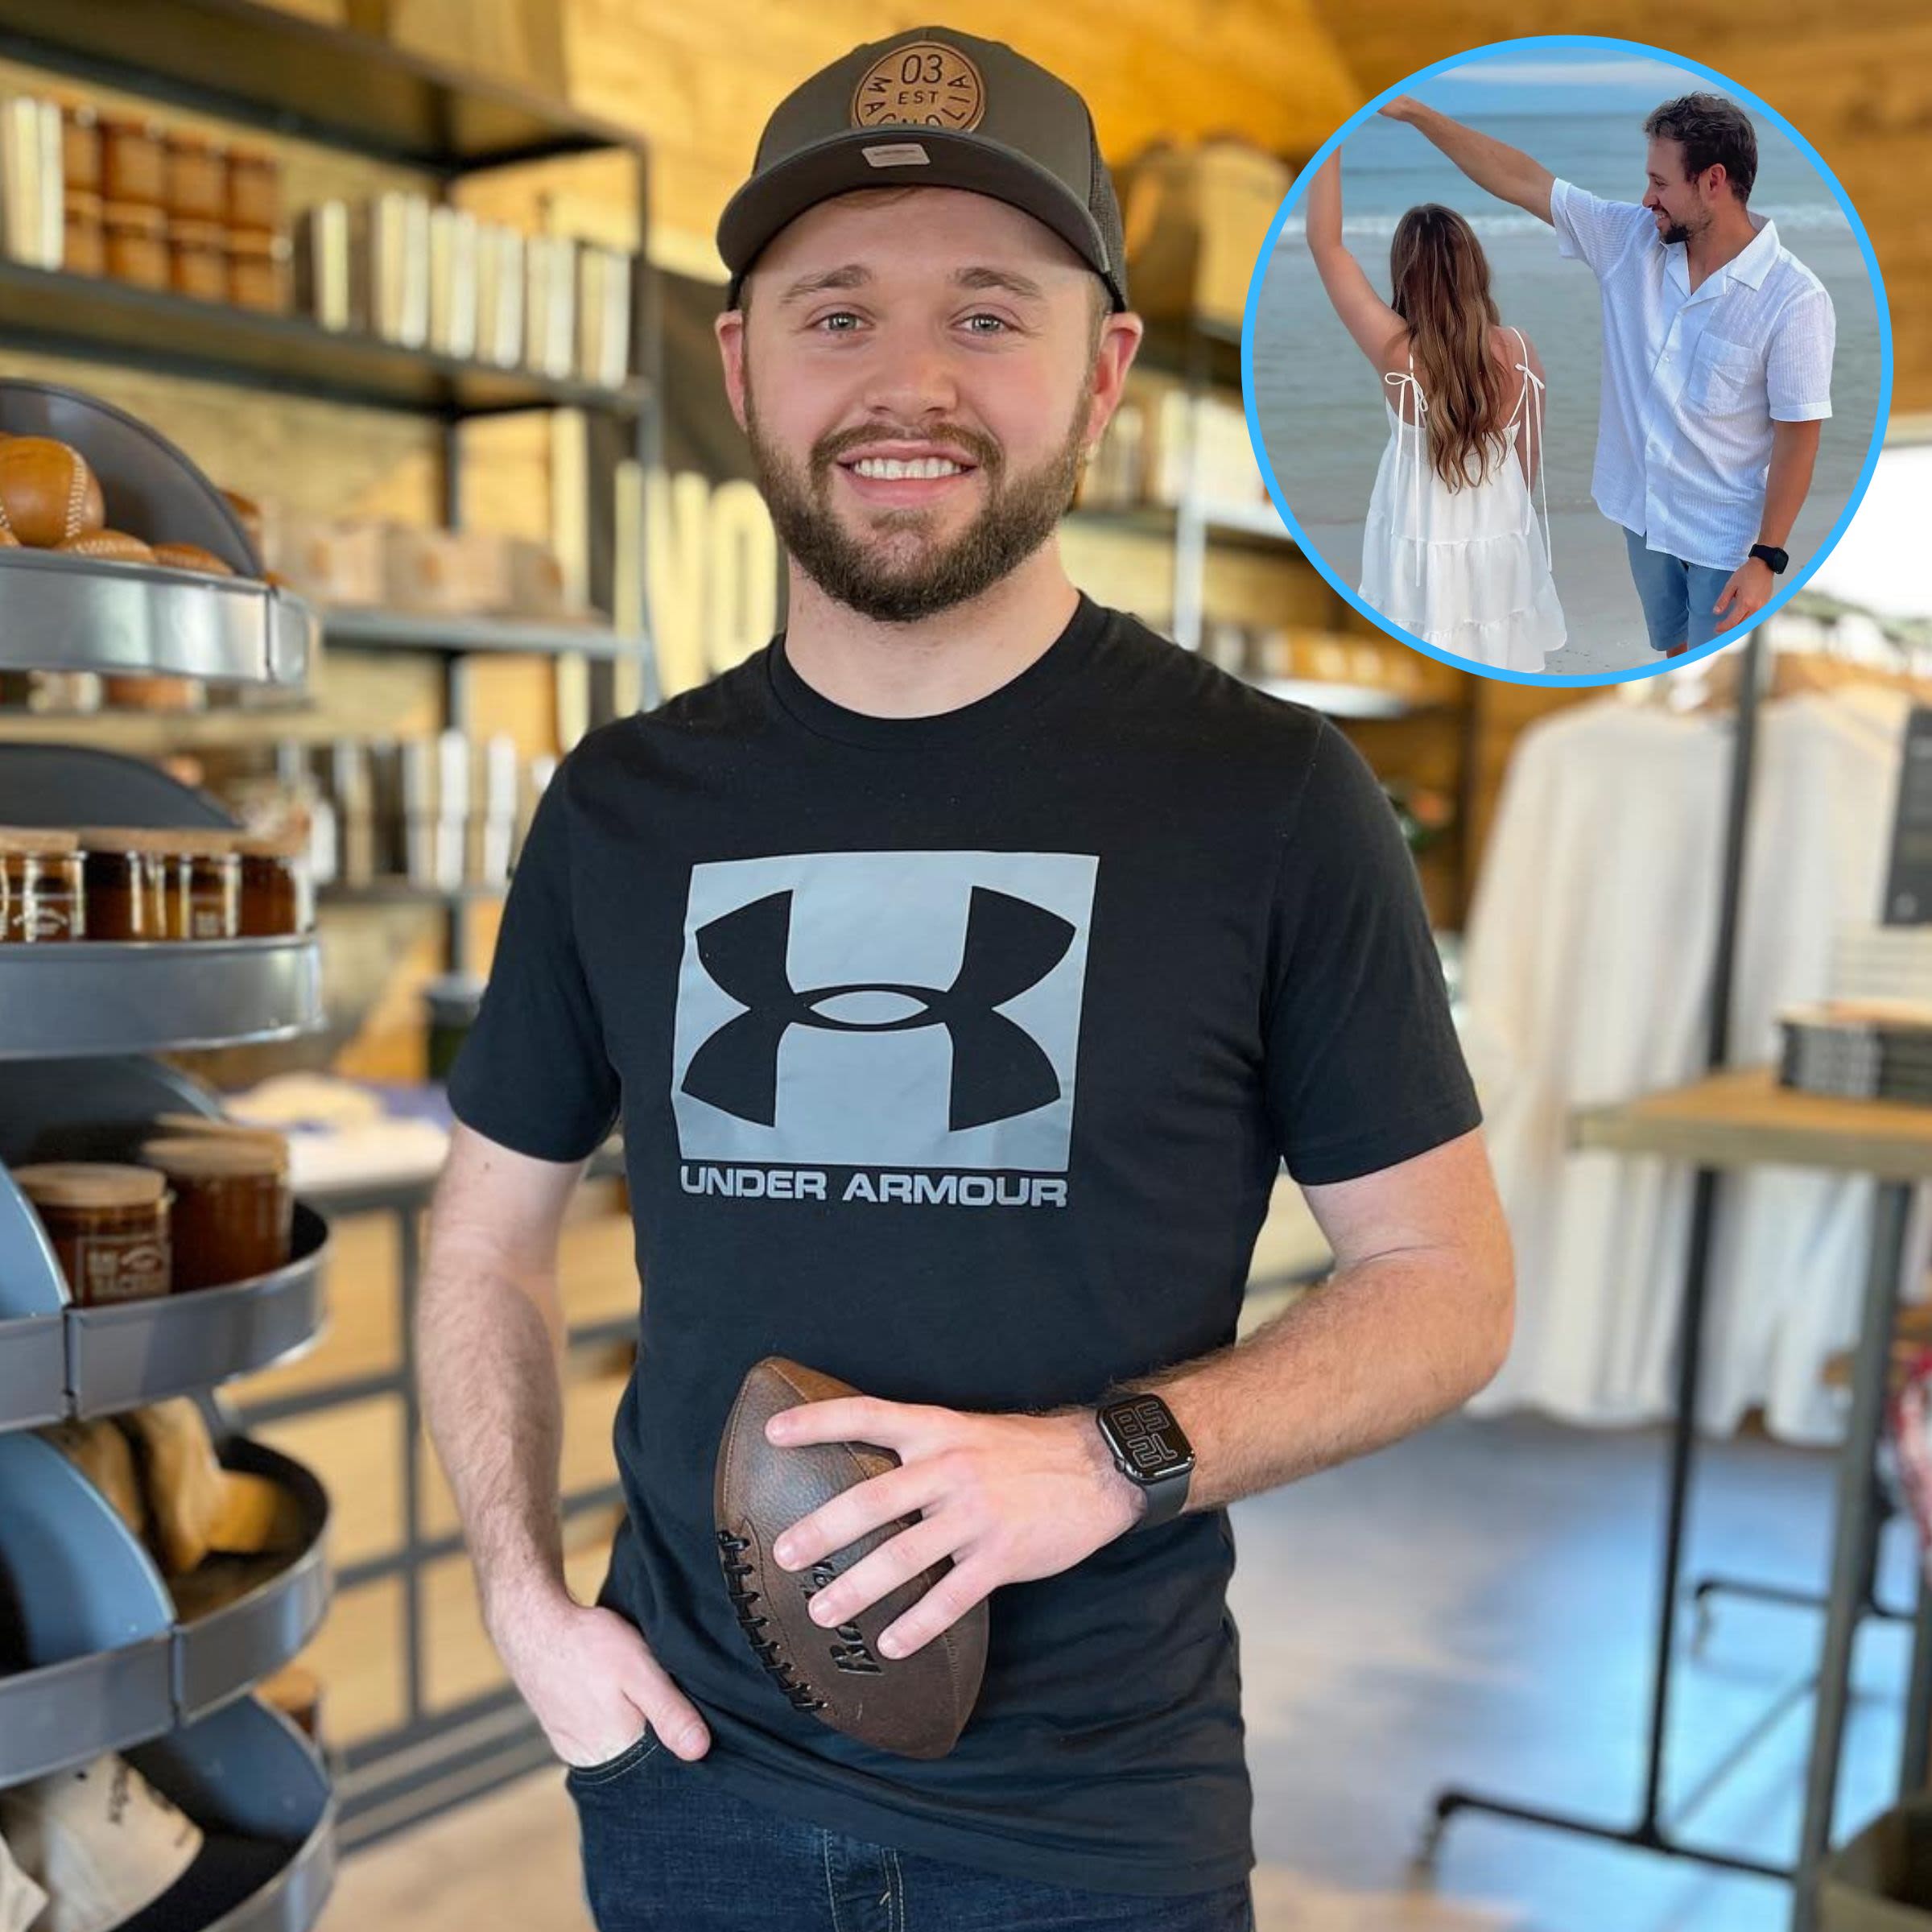 Counting On’s Jason Duggar Debuts New Courtship With Mystery Woman, Fans Suspect Bates Daughter